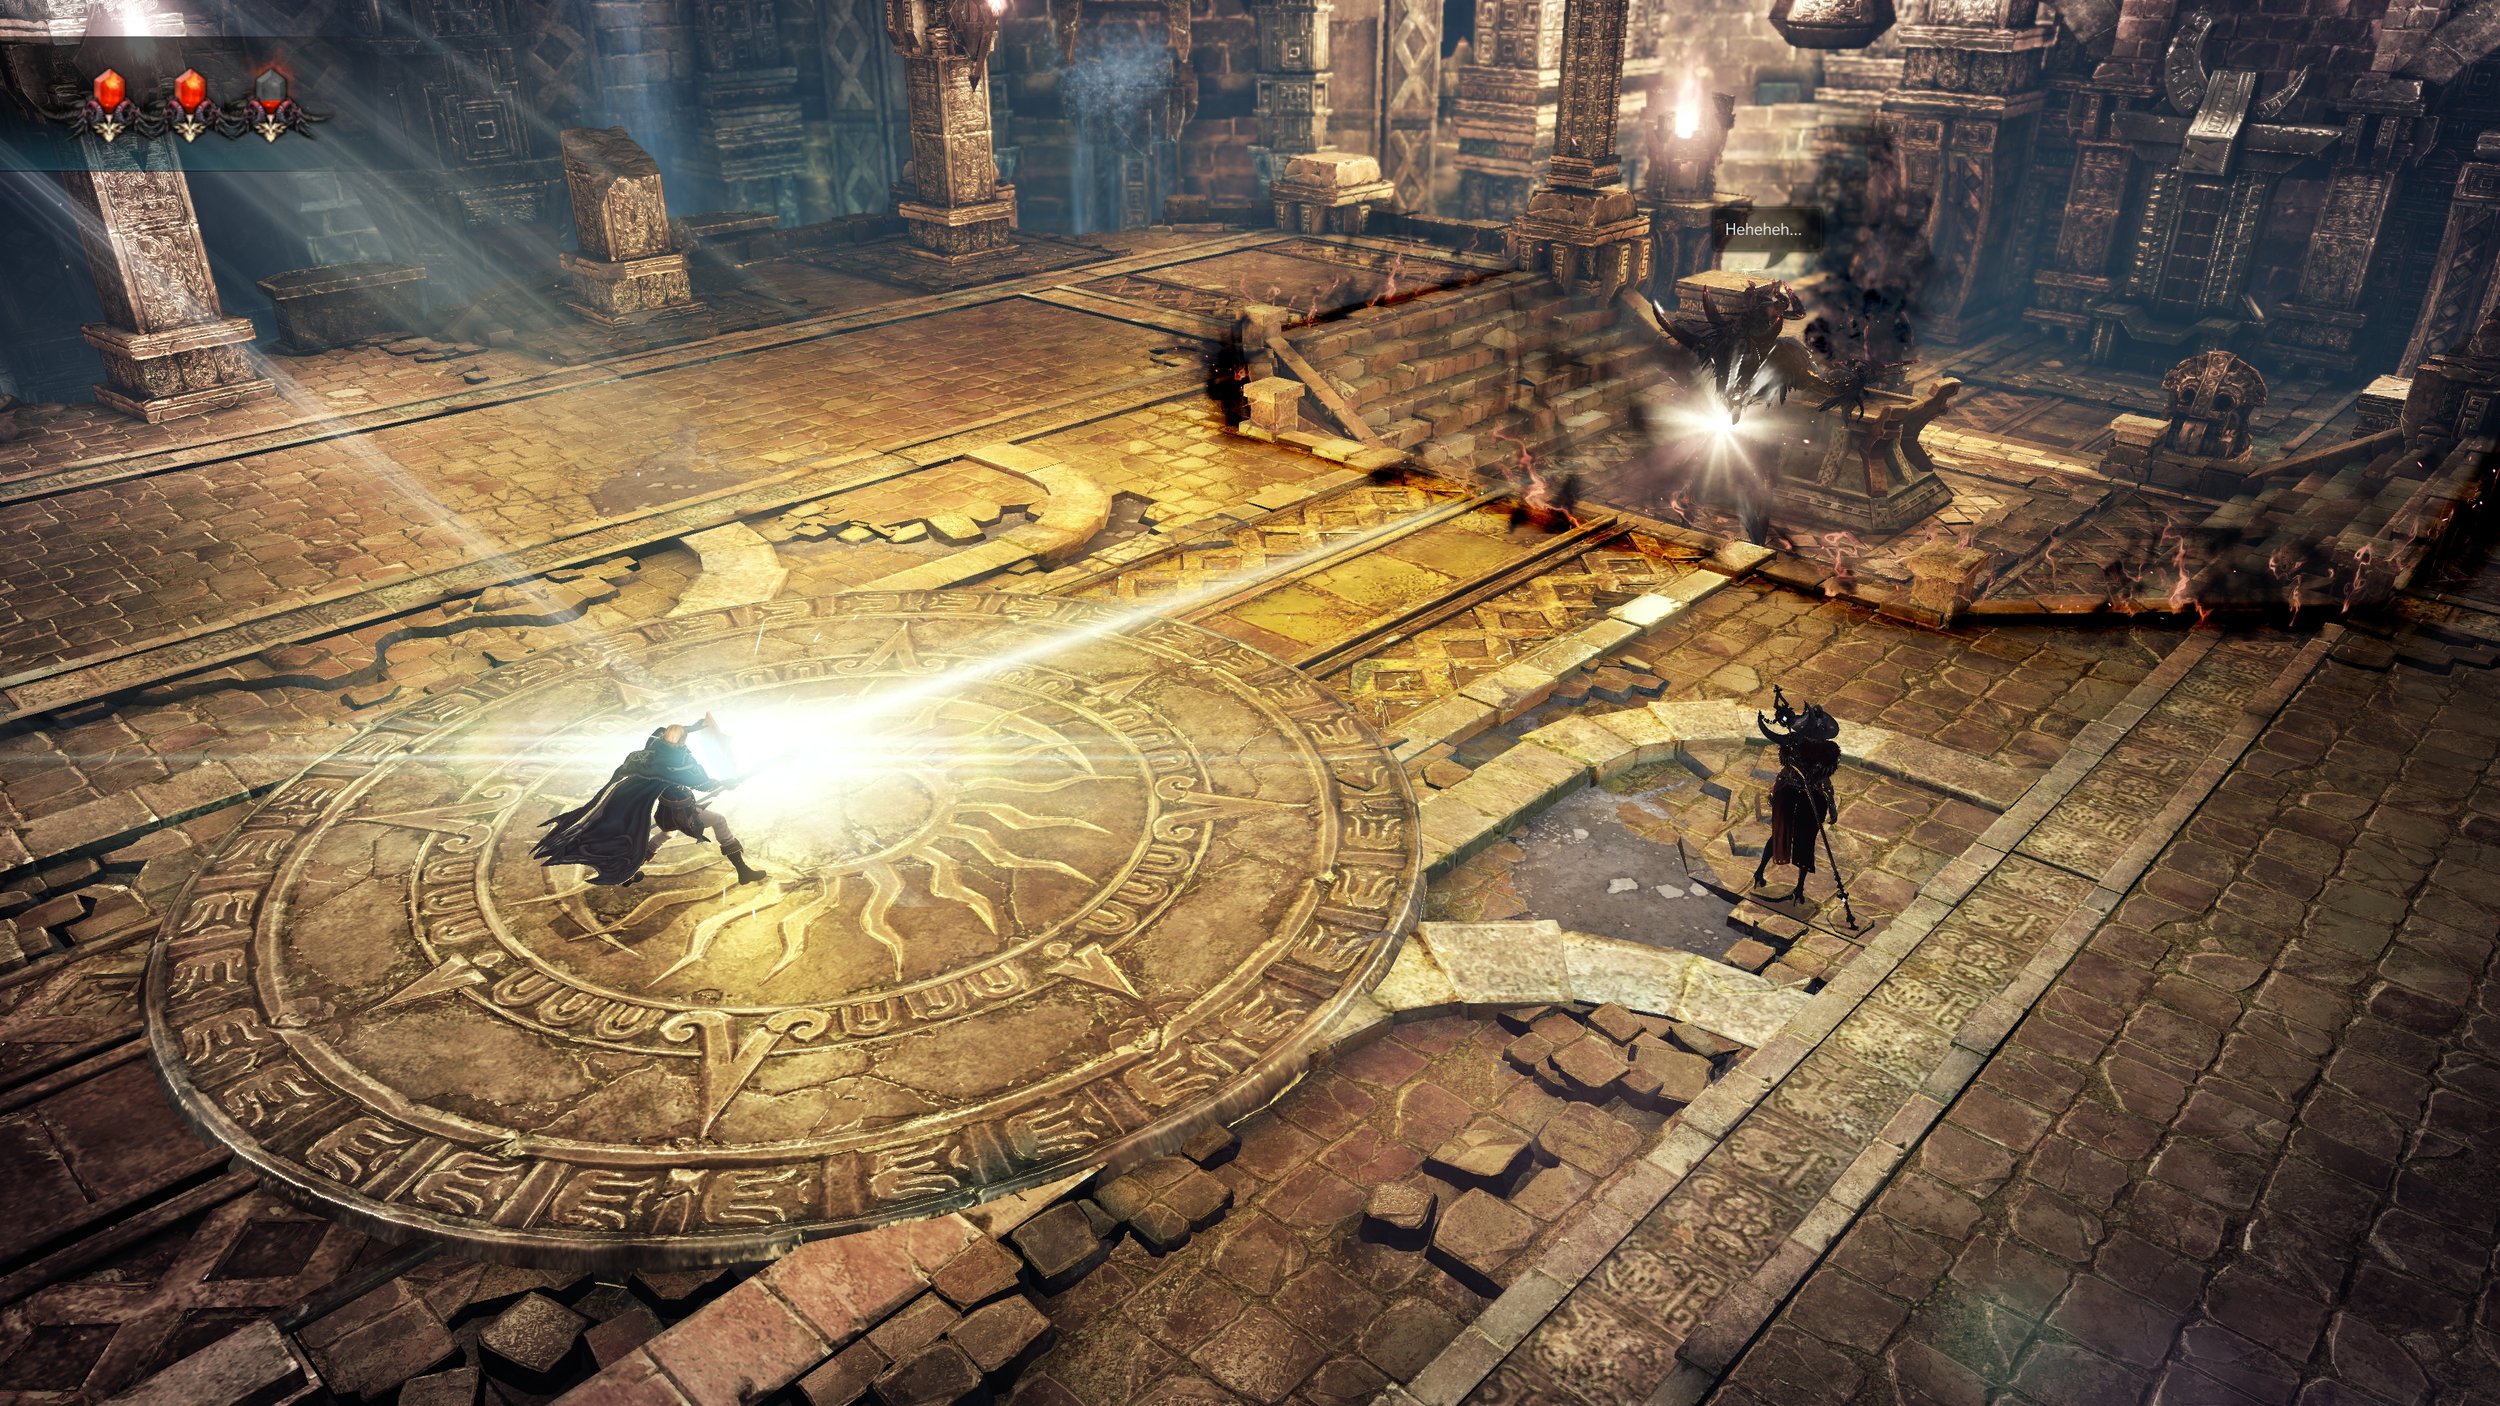 Lost Ark review: The MMORPG we've been waiting for